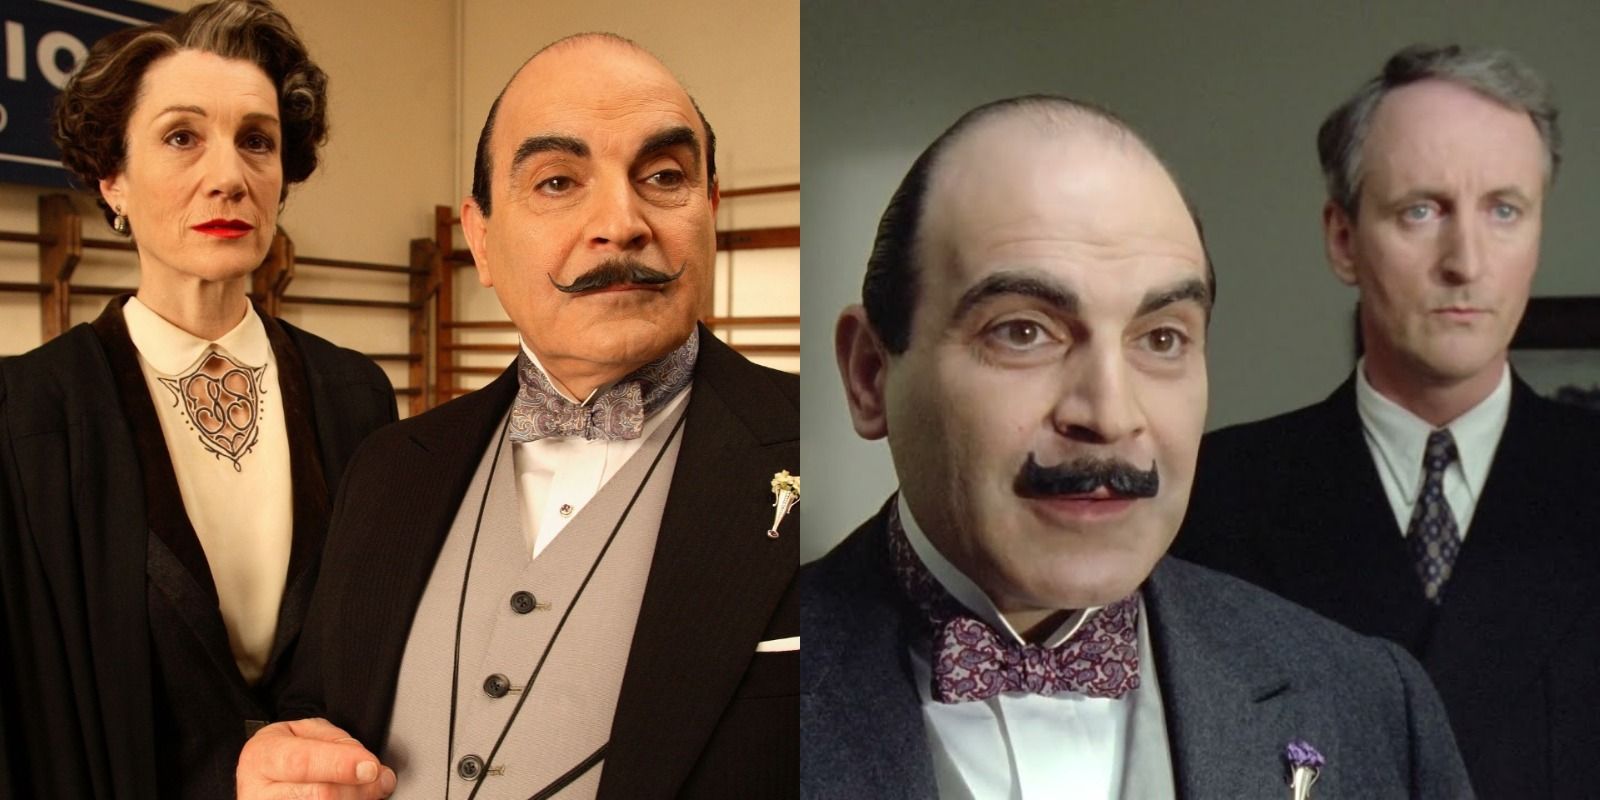 Split image of Poirot episodes "Cat Among the Pigeons" and "The ABC Murders"